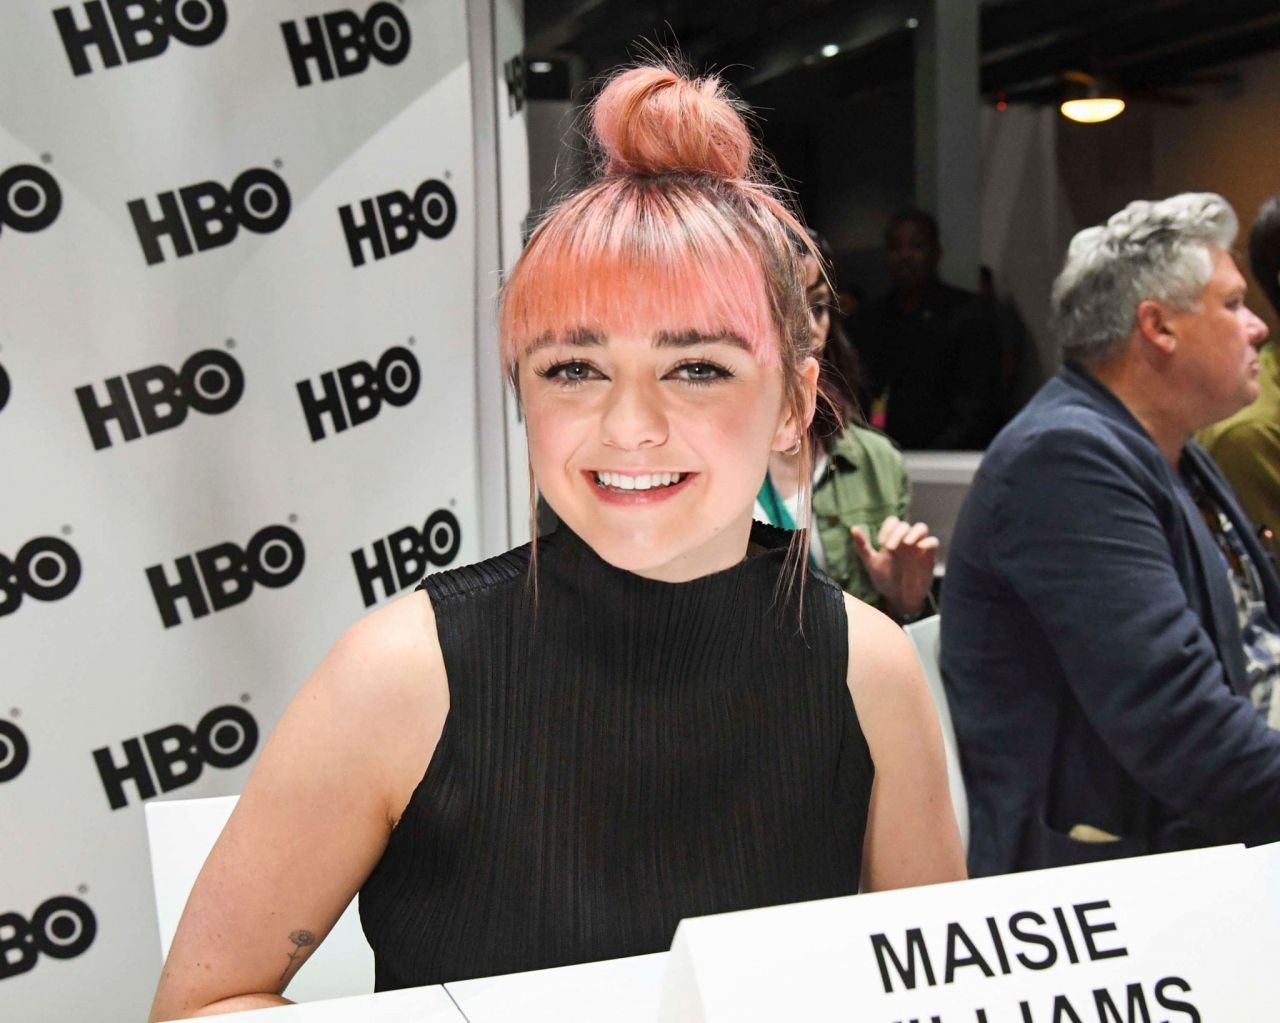 maisie-williams-game-of-thrones-cast-autograph-signing-at-sdcc-2019-1.jpg